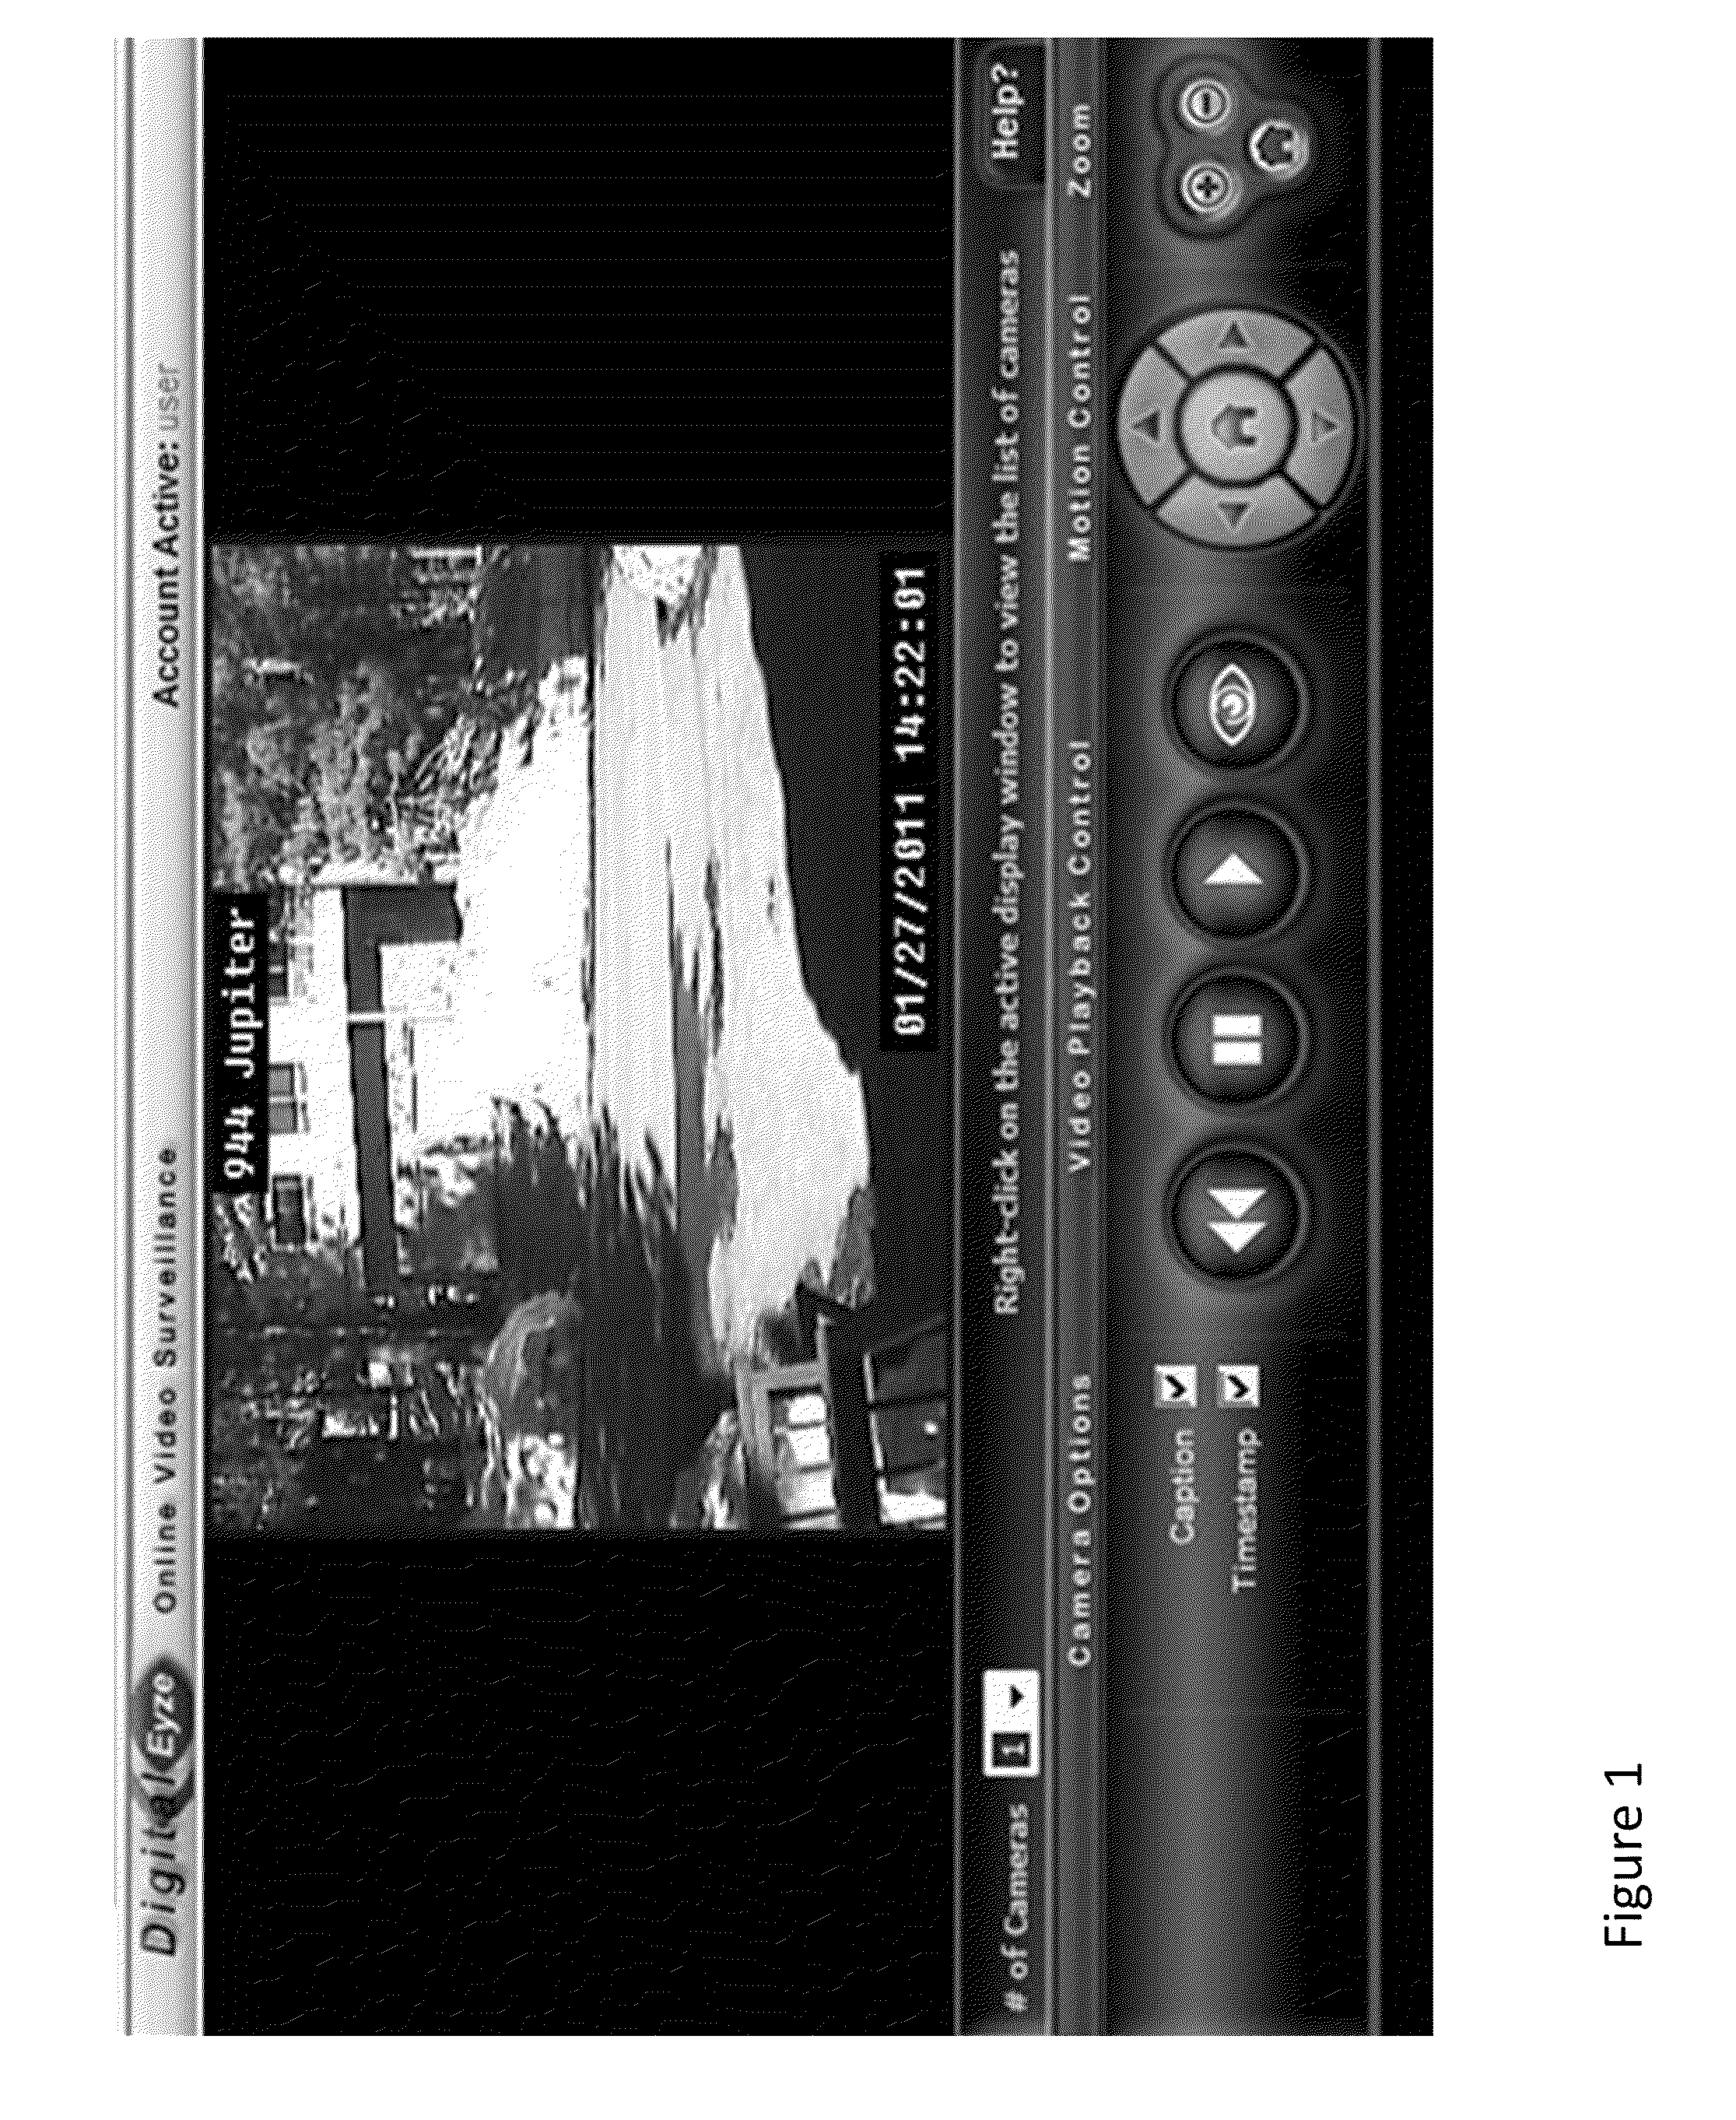 System and method for account-based storage and playback of remotely recorded video data